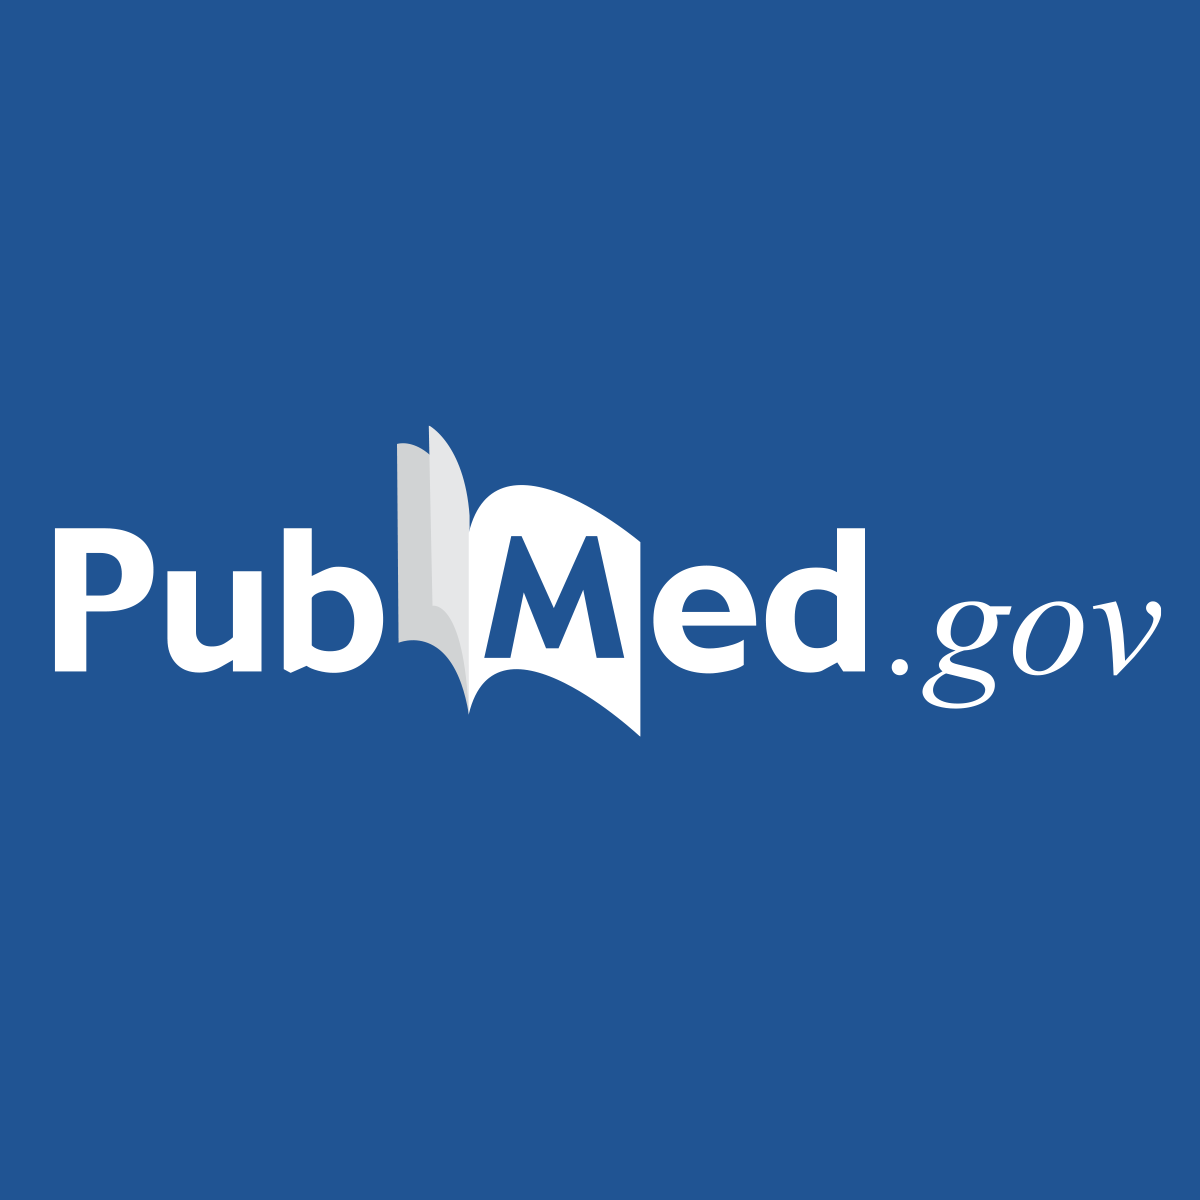 Retrospective cohort study of nanoparticle albumin-bound paclitaxel plus ramucirumab versus paclitaxel plus ramucirumab as second-line treatment in patients with advanced gastric cancer - PubMed